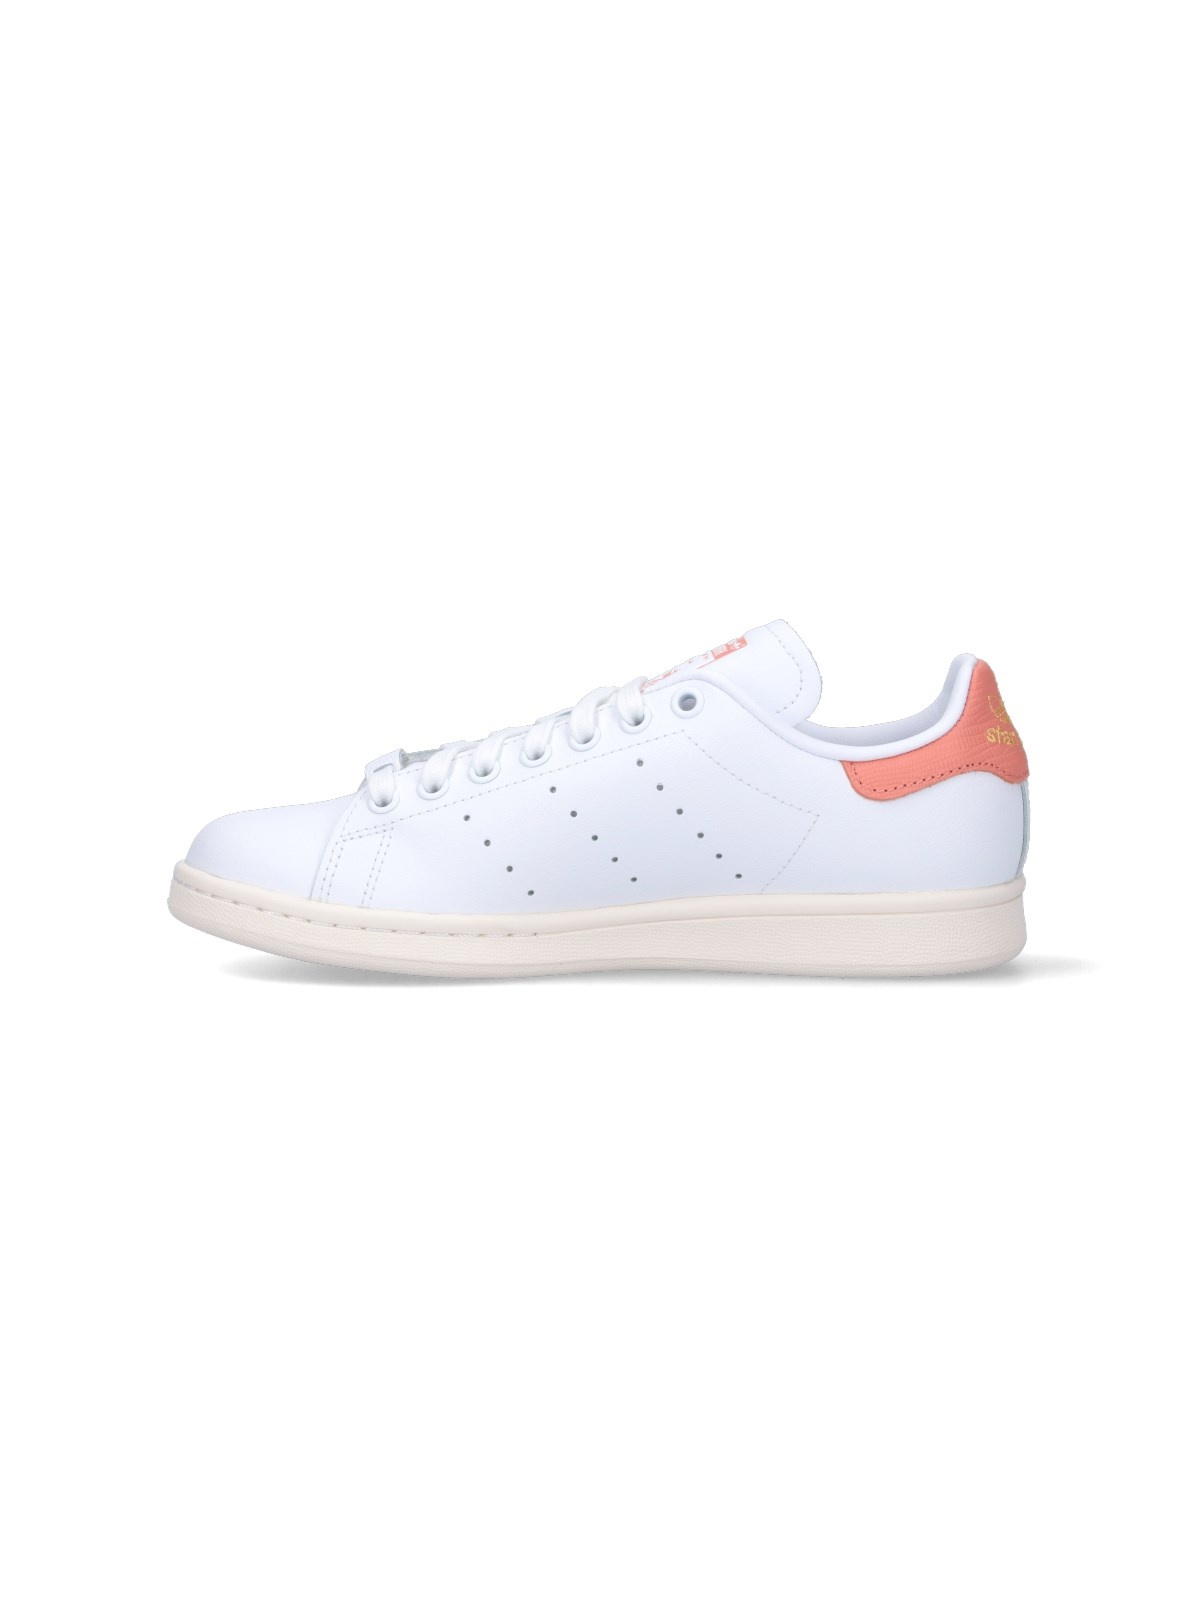 "STAN SMITH" SNEAKERS - 3